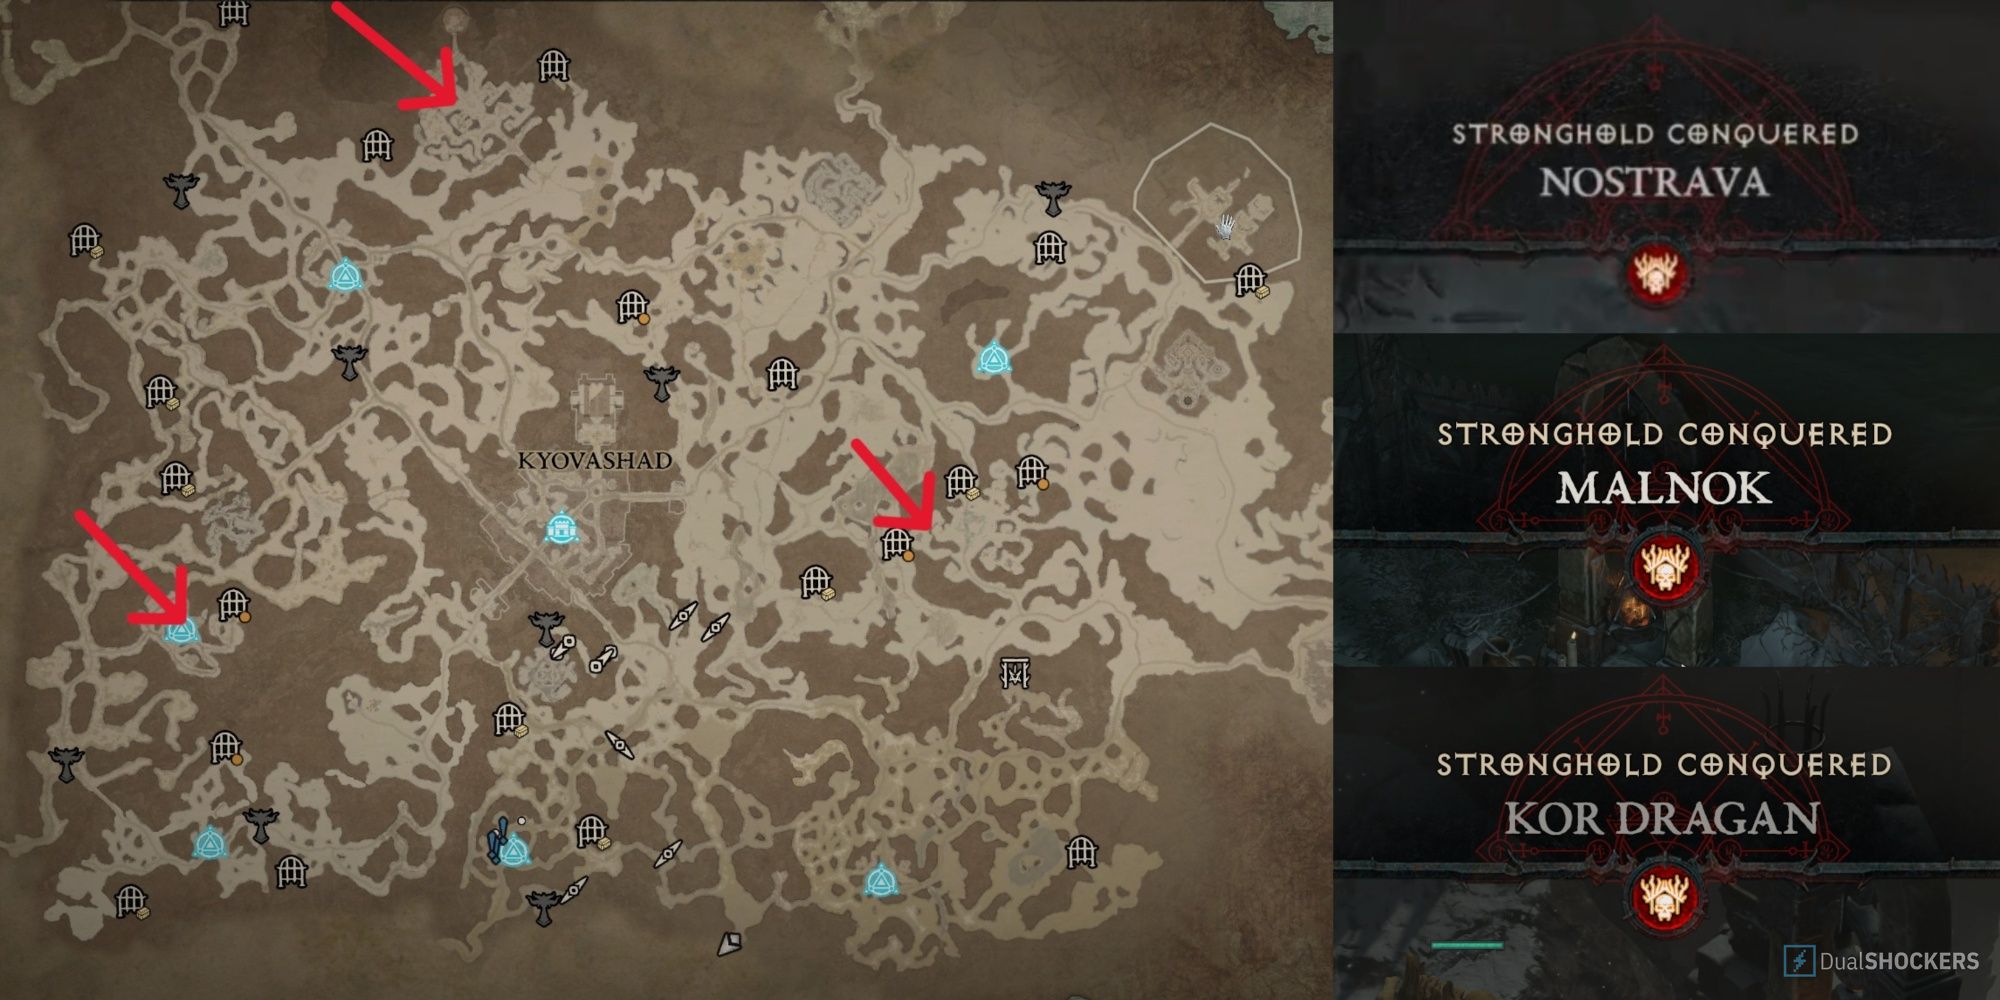 A map of the Fractured Peaks with all Strongholds marked alongside the achievement screen from completing each one